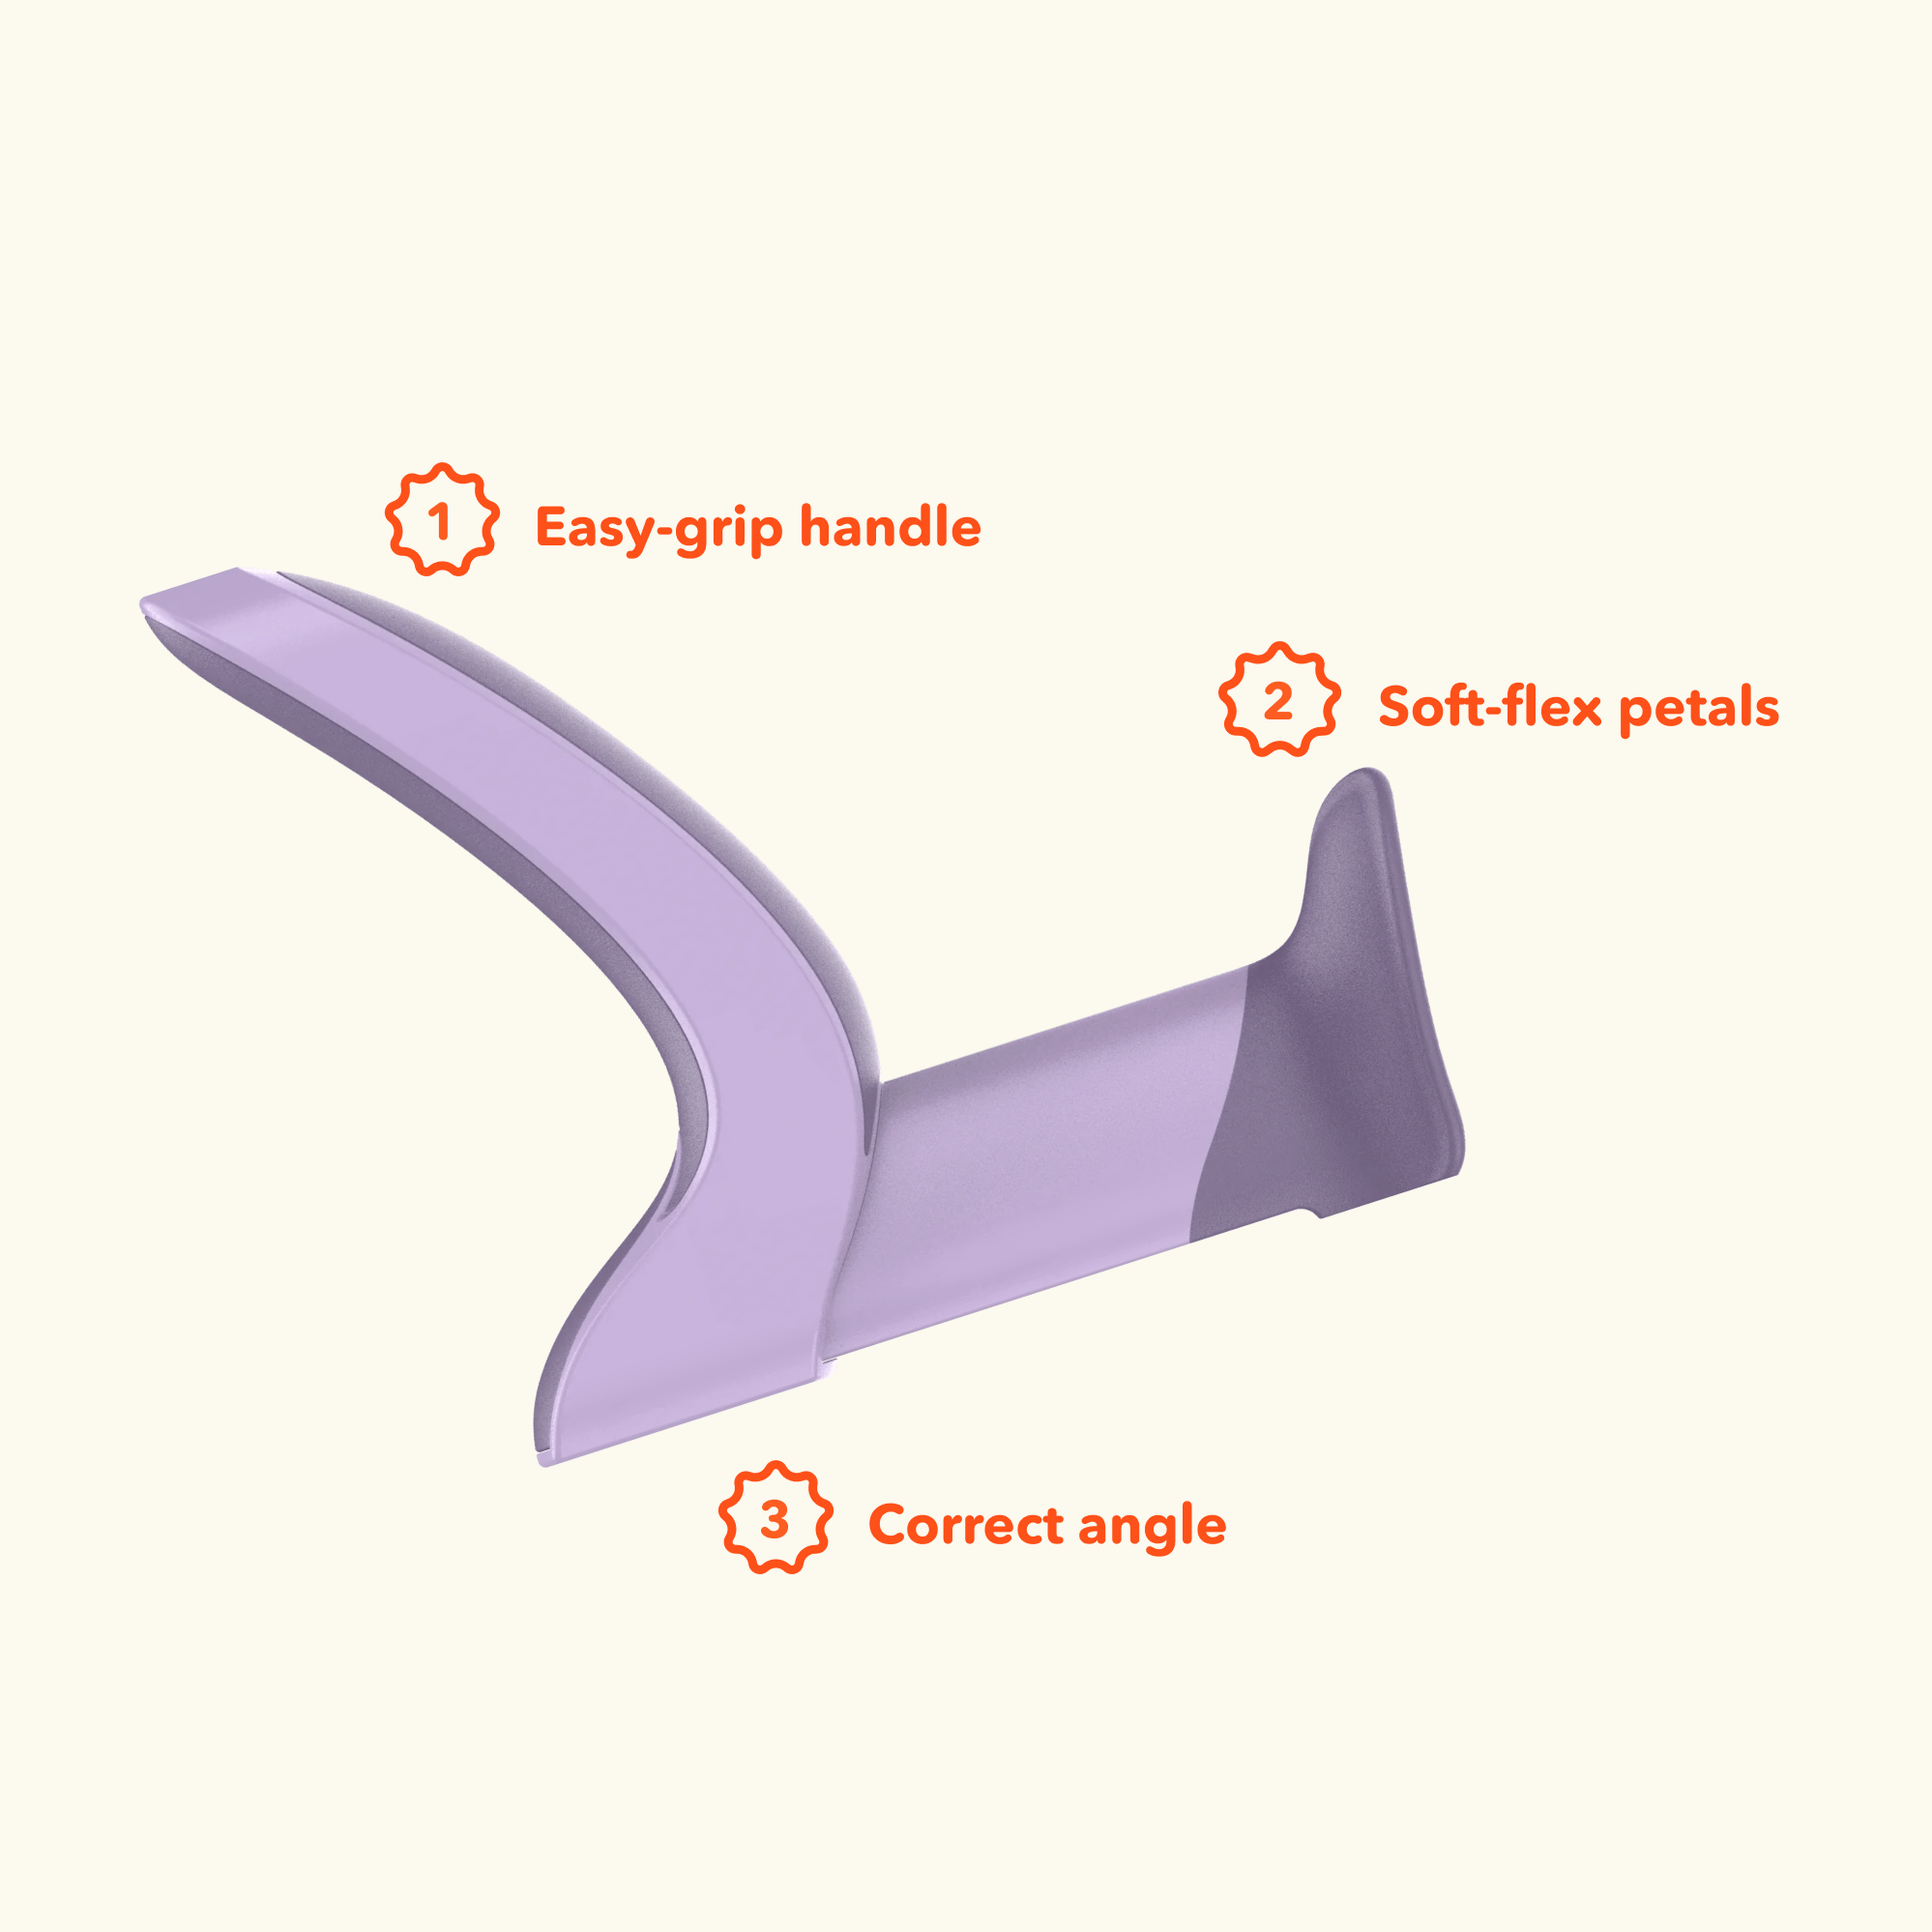 The Tina device at a 45 degree angle with 3 features.